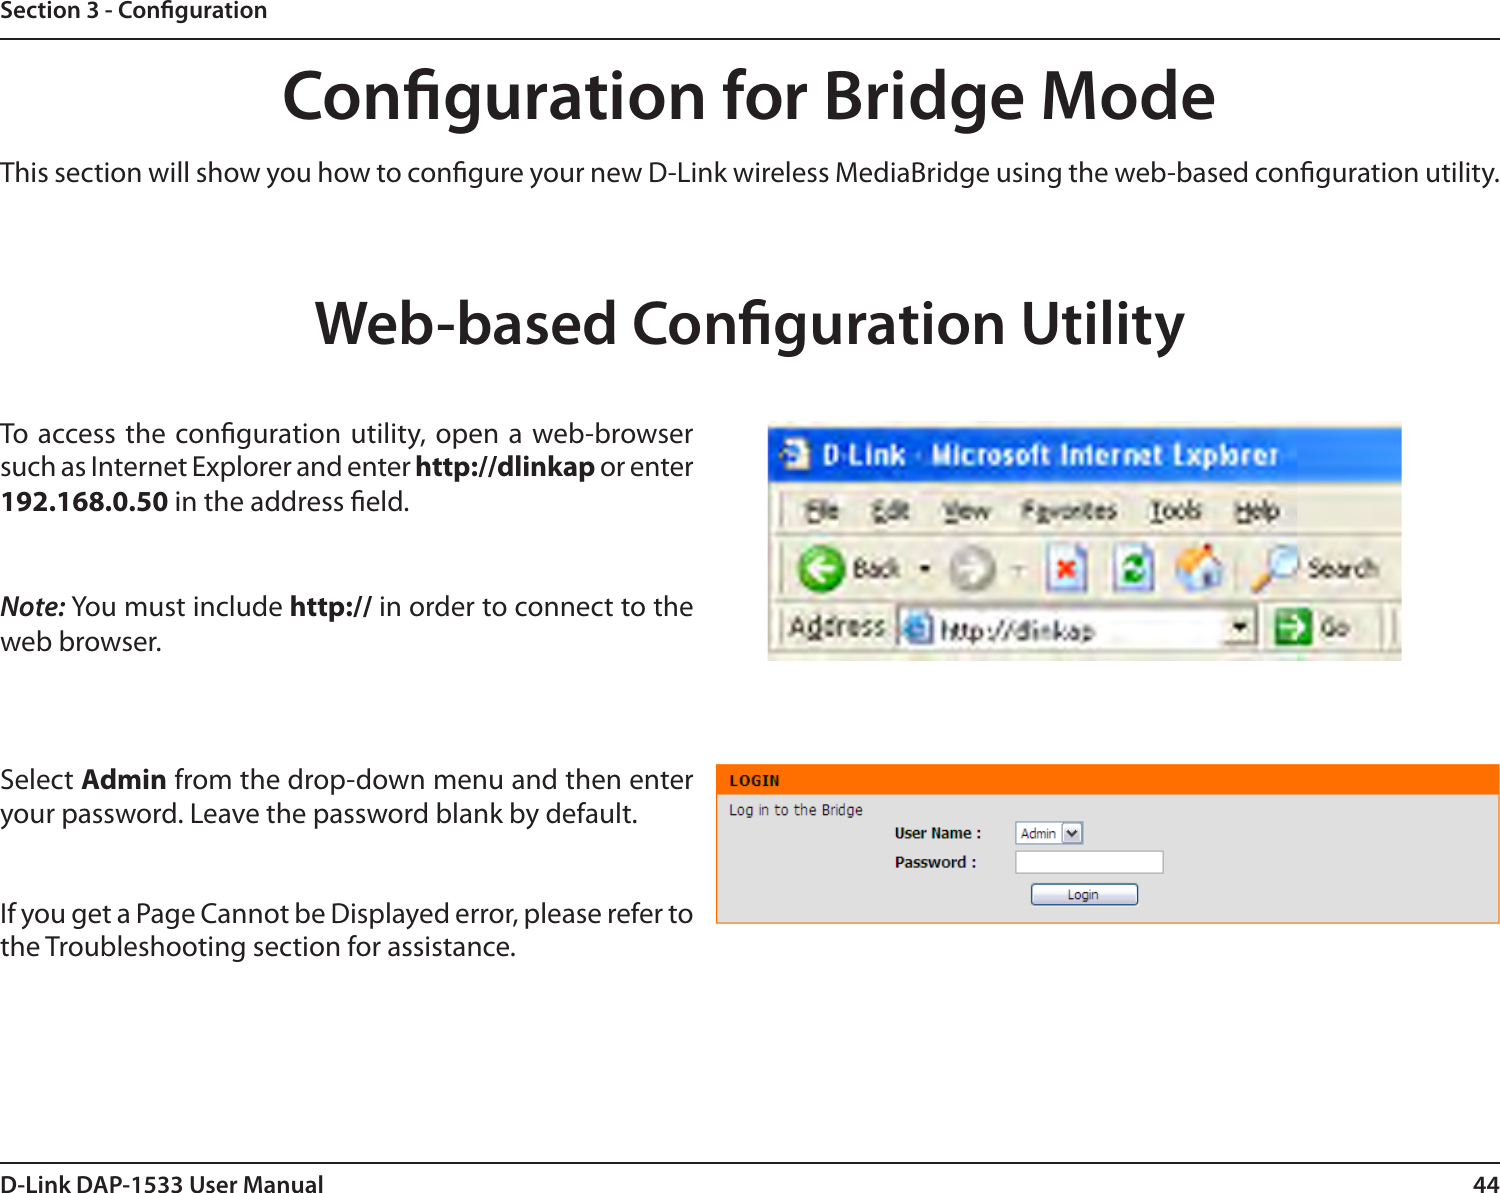 44D-Link DAP-1533 User ManualSection 3 - CongurationConguration for Bridge ModeThis section will show you how to congure your new D-Link wireless MediaBridge using the web-based conguration utility.Web-based Conguration UtilityTo access the conguration utility, open a web-browser such as Internet Explorer and enter http://dlinkap or enter 192.168.0.50 in the address eld.Note: You must include http:// in order to connect to the web browser.Select Admin from the drop-down menu and then enter your password. Leave the password blank by default.If you get a Page Cannot be Displayed error, please refer to the Troubleshooting section for assistance.